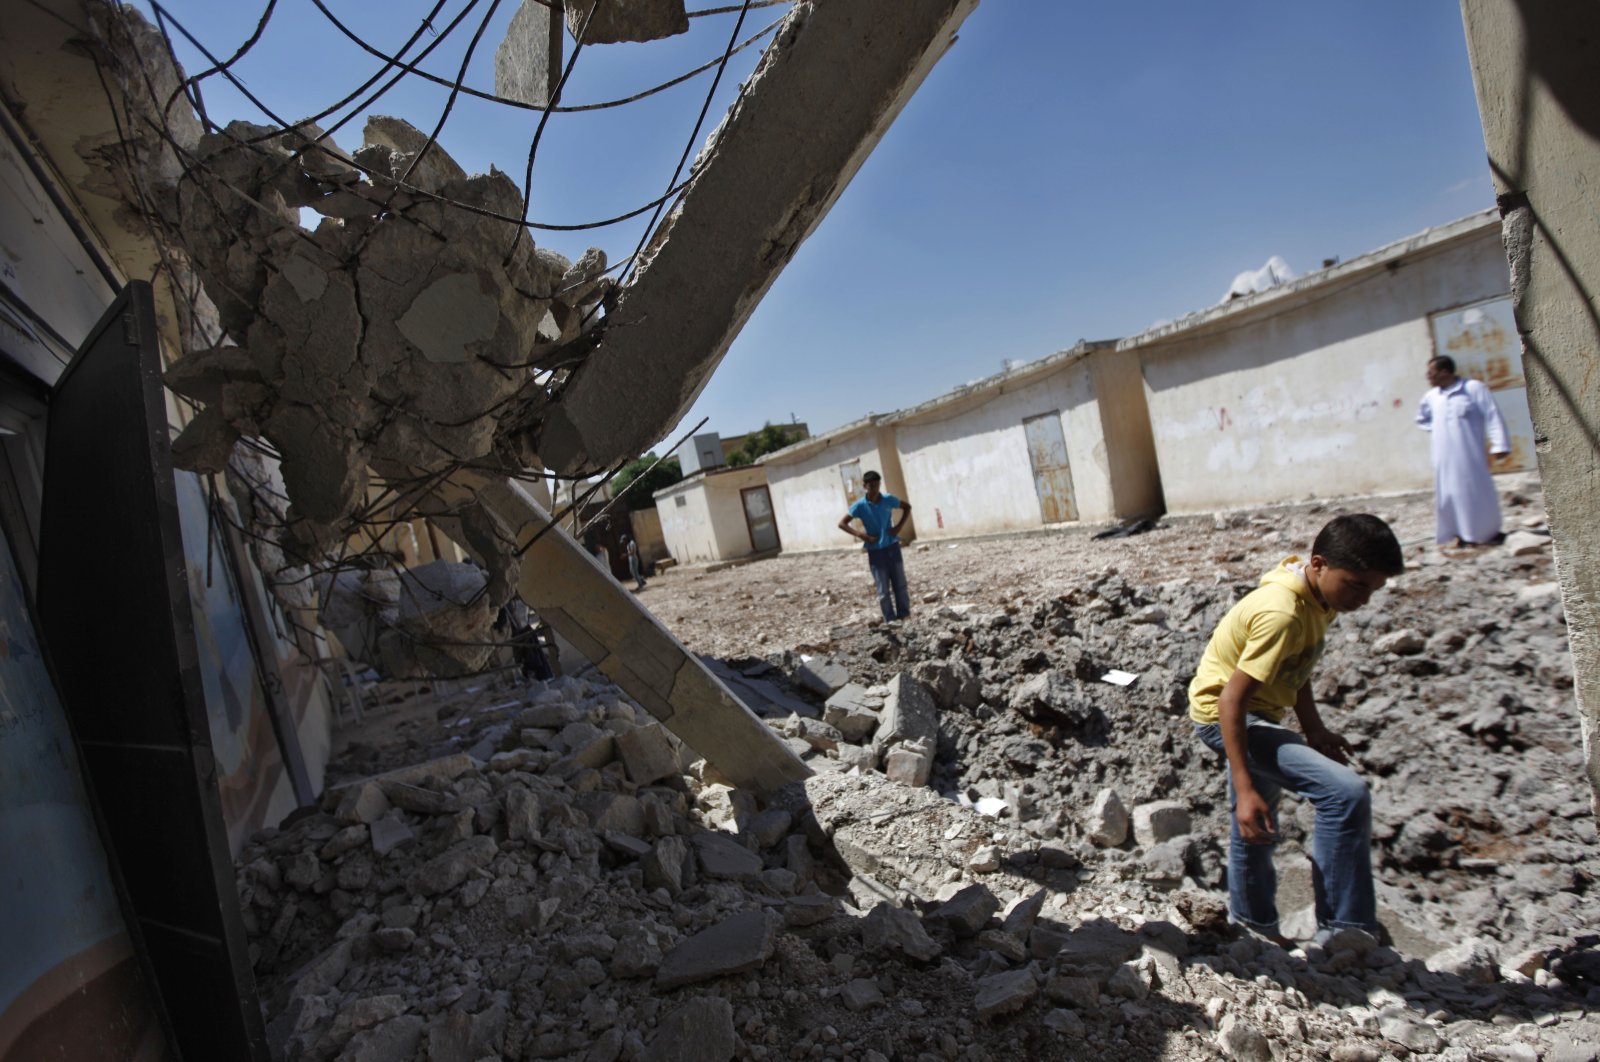 Syrians check the damage at a destroyed school after it was hit by an airstrike killing six Syrians in town of Tal Rifaat on the outskirts of Aleppo, Syria, Aug. 8, 2012. (AP File Photo)